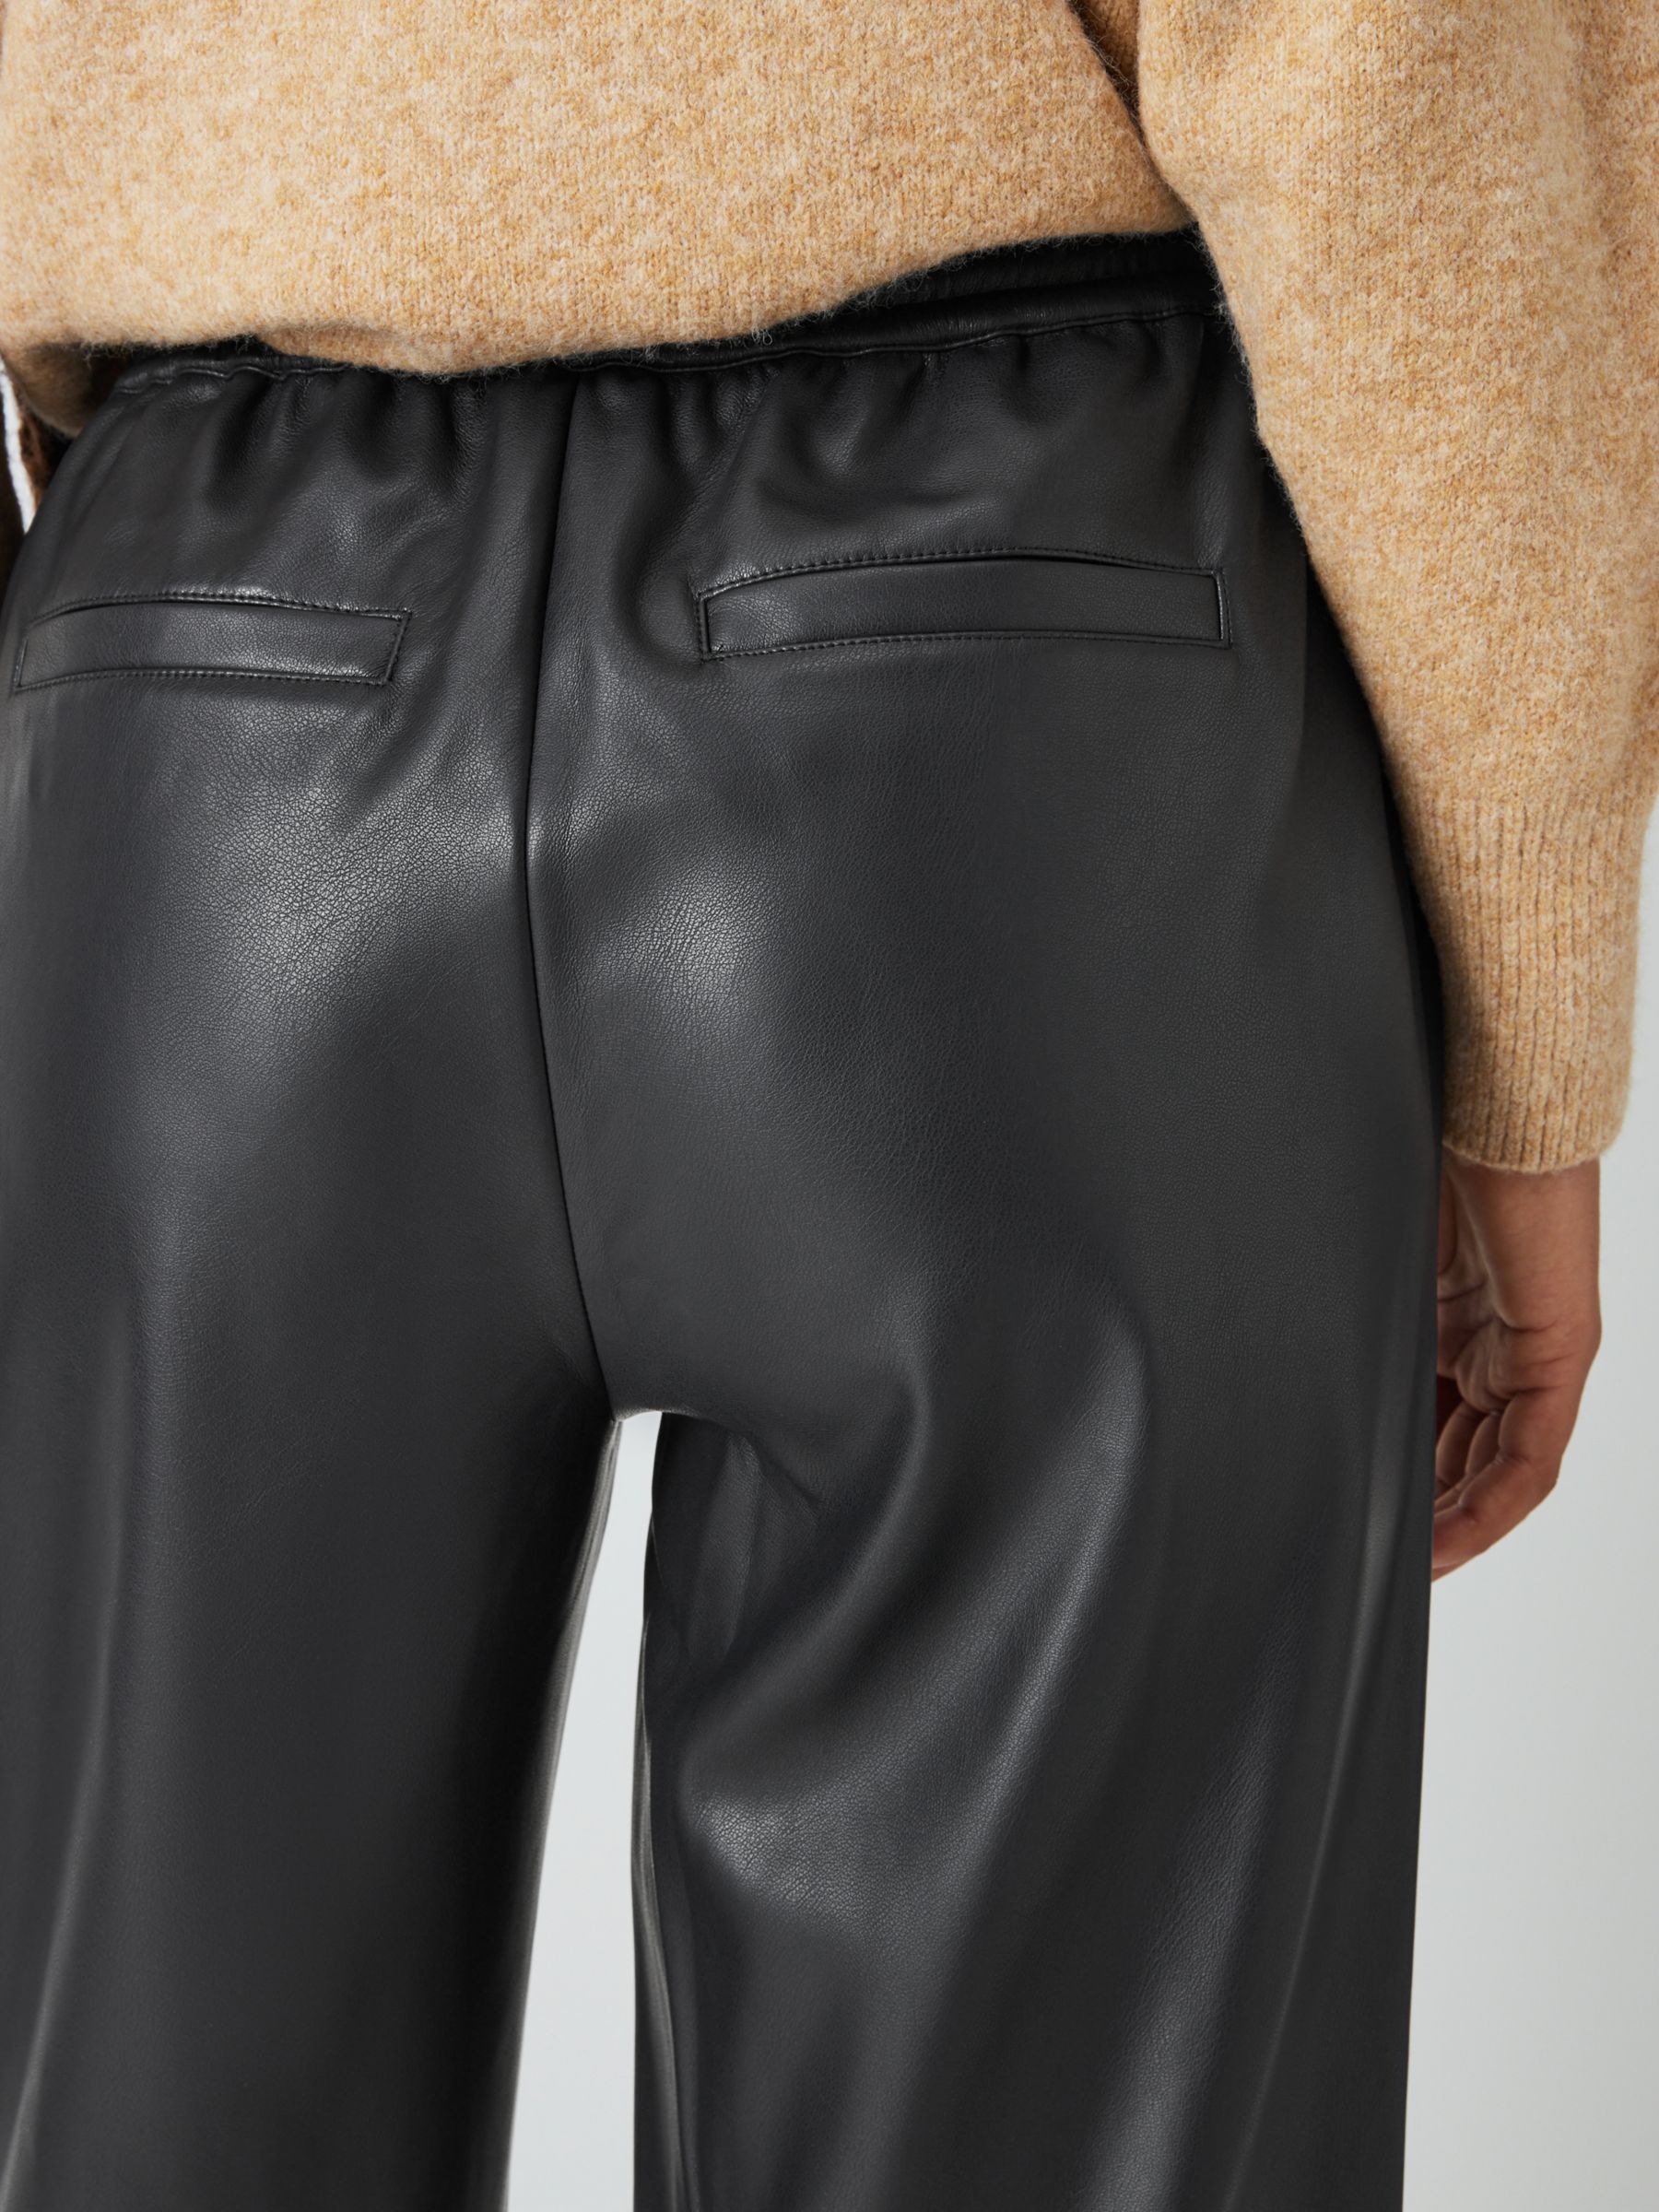 John Lewis ANYDAY Plain Faux Leather Trousers, Black at John Lewis ...